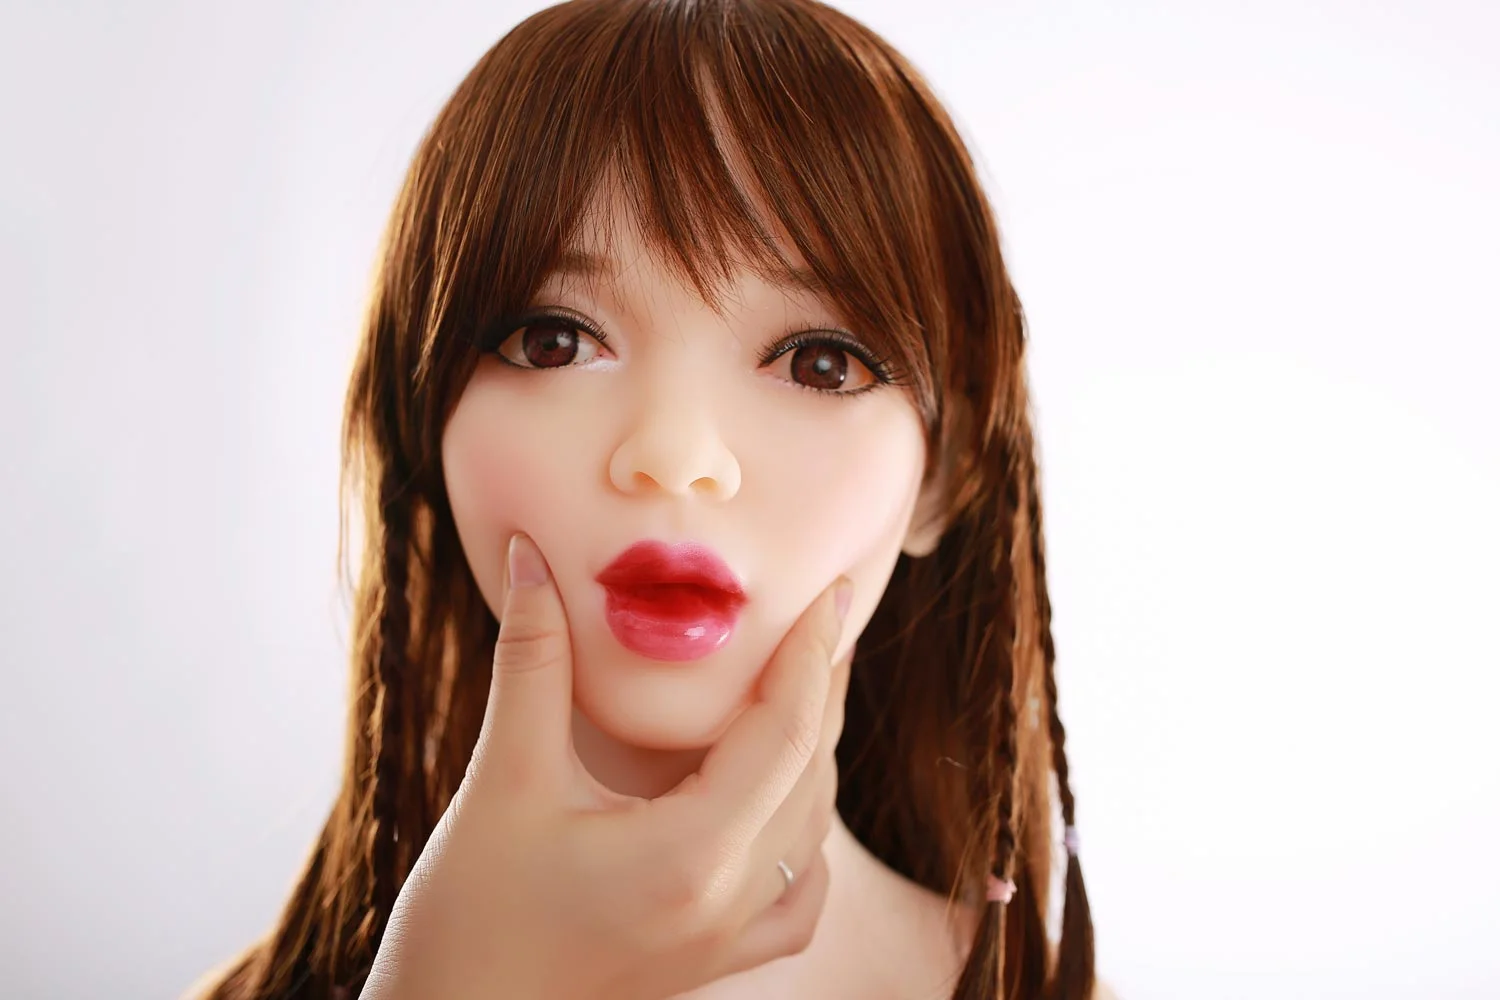 Mini sex doll with chin pinched